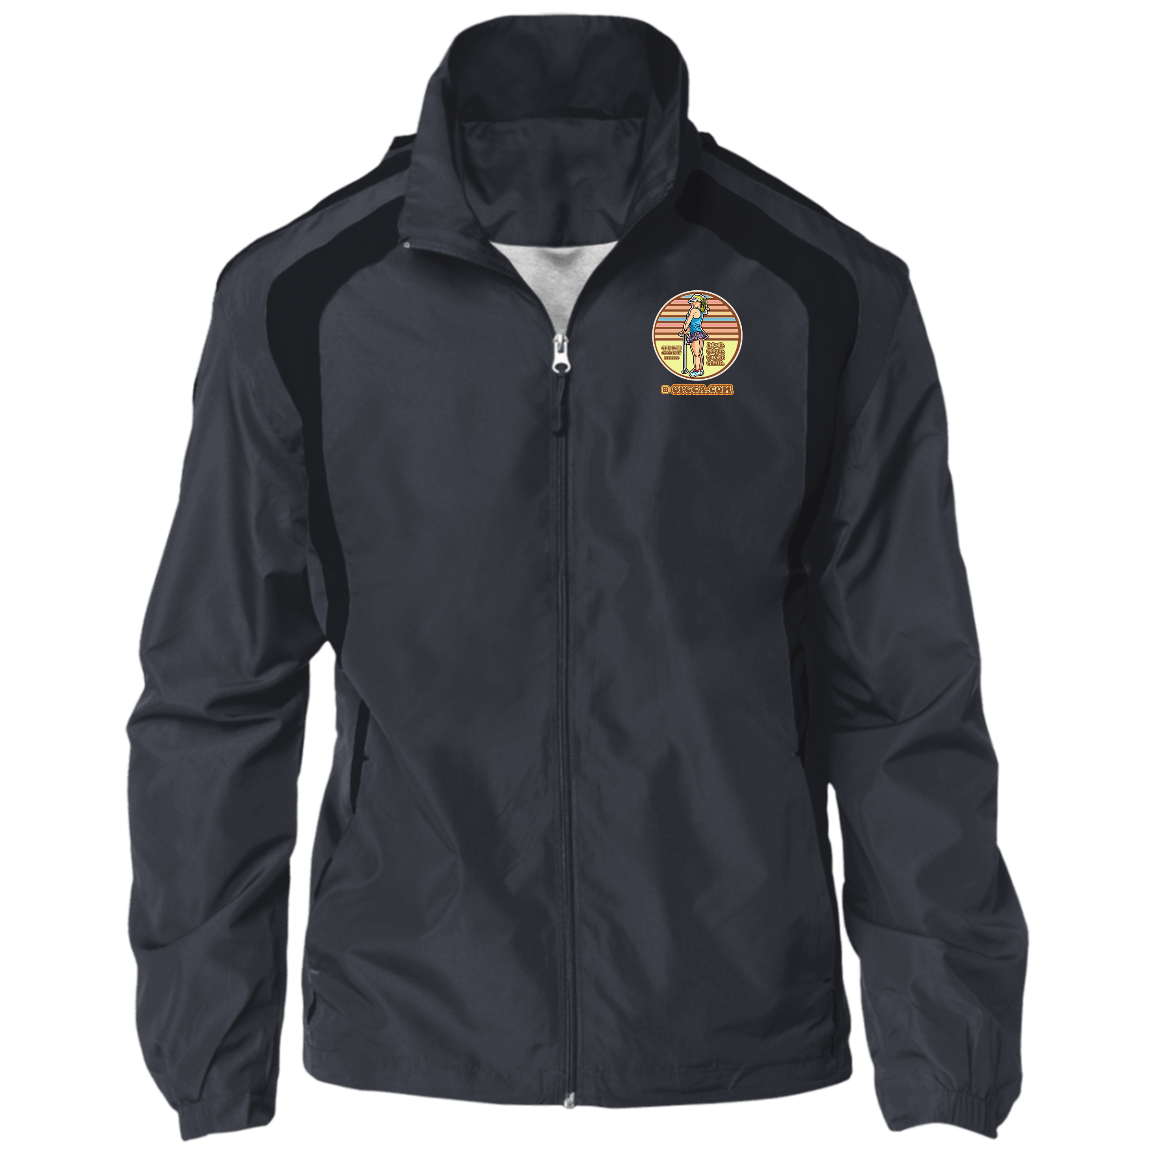 OPG Custom Design #28. Drive it. Chip it. One Putt golf it. 100% Polyester Shell Jacket